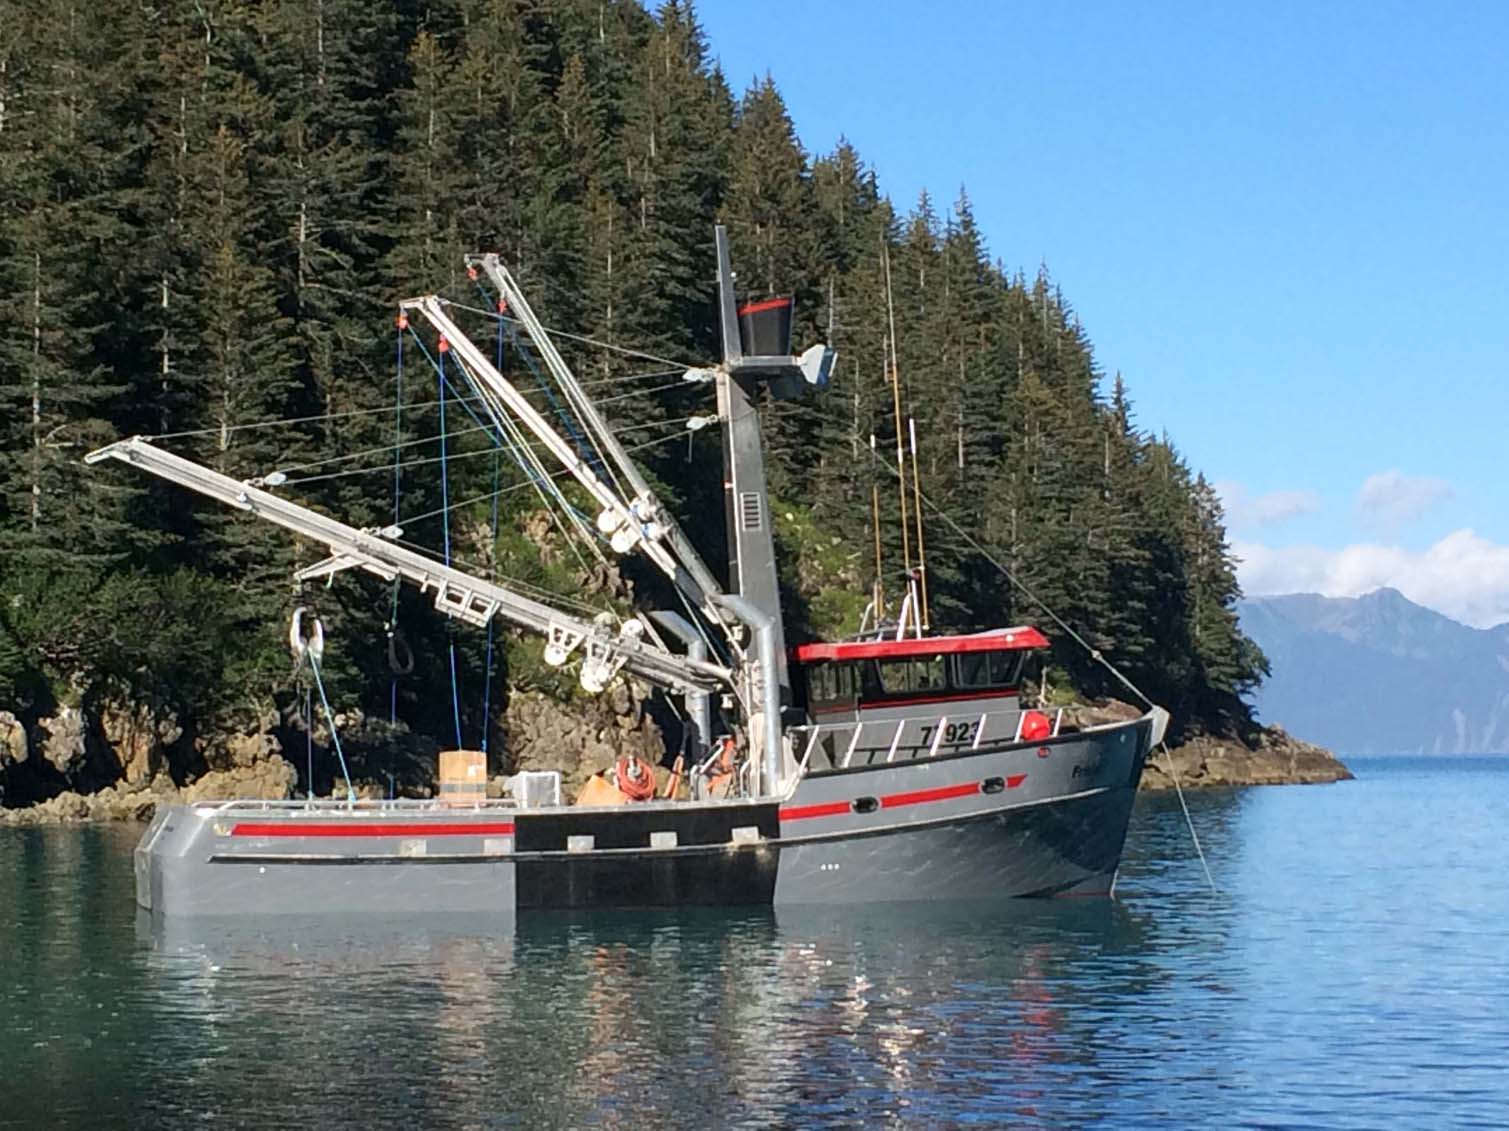 Above, this 58-foot seiner was built in Homer in 2013 for Gus Linville of Seward by Freddy’s Marine, as well as “nearly all of Homer’s marine trades,” according to Eric Engebretsen of Bay Weld Boats. -Photo provided